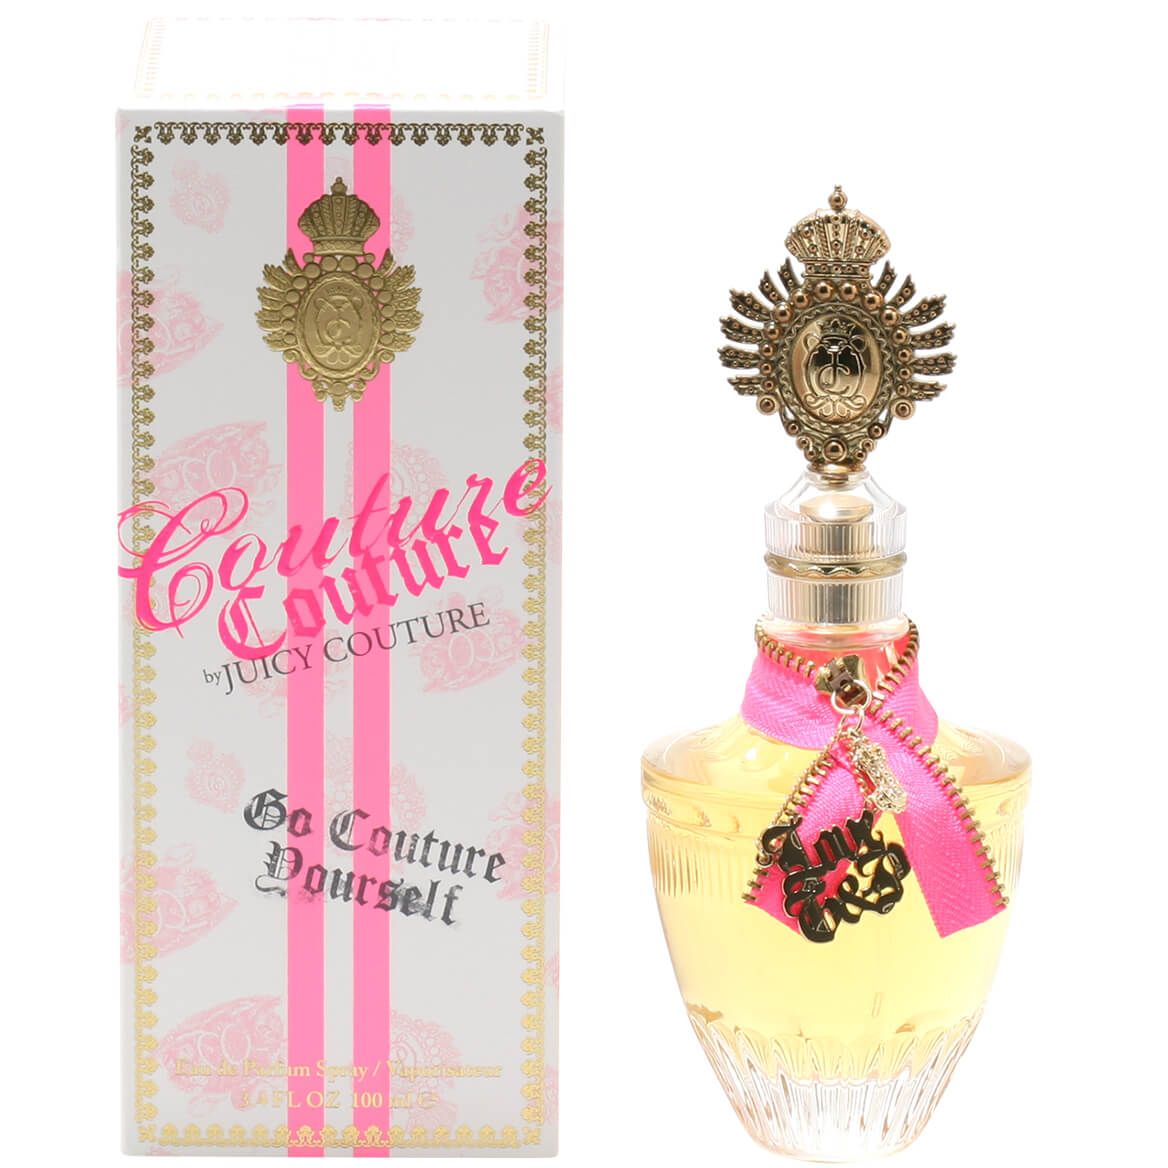 Couture Couture by Juicy Couture for Women EDP, 3.4 oz. + '-' + 373099